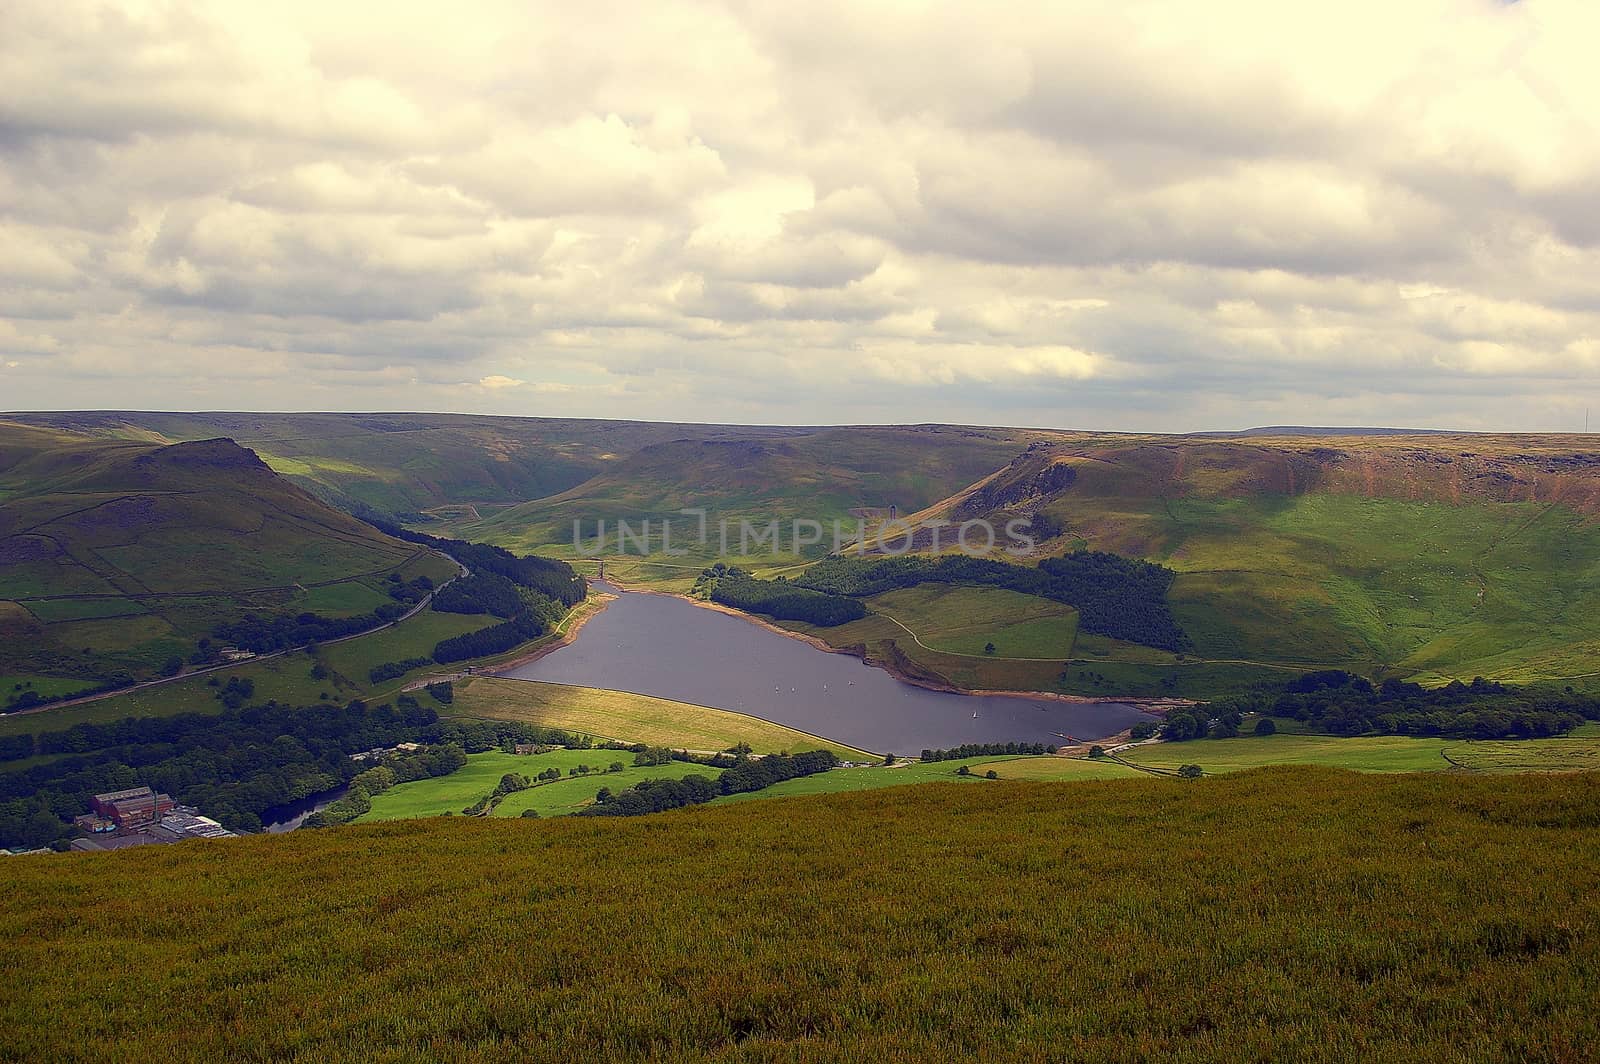 View across to Dovestone Reservoir in the Oldham area near Manchester, UK